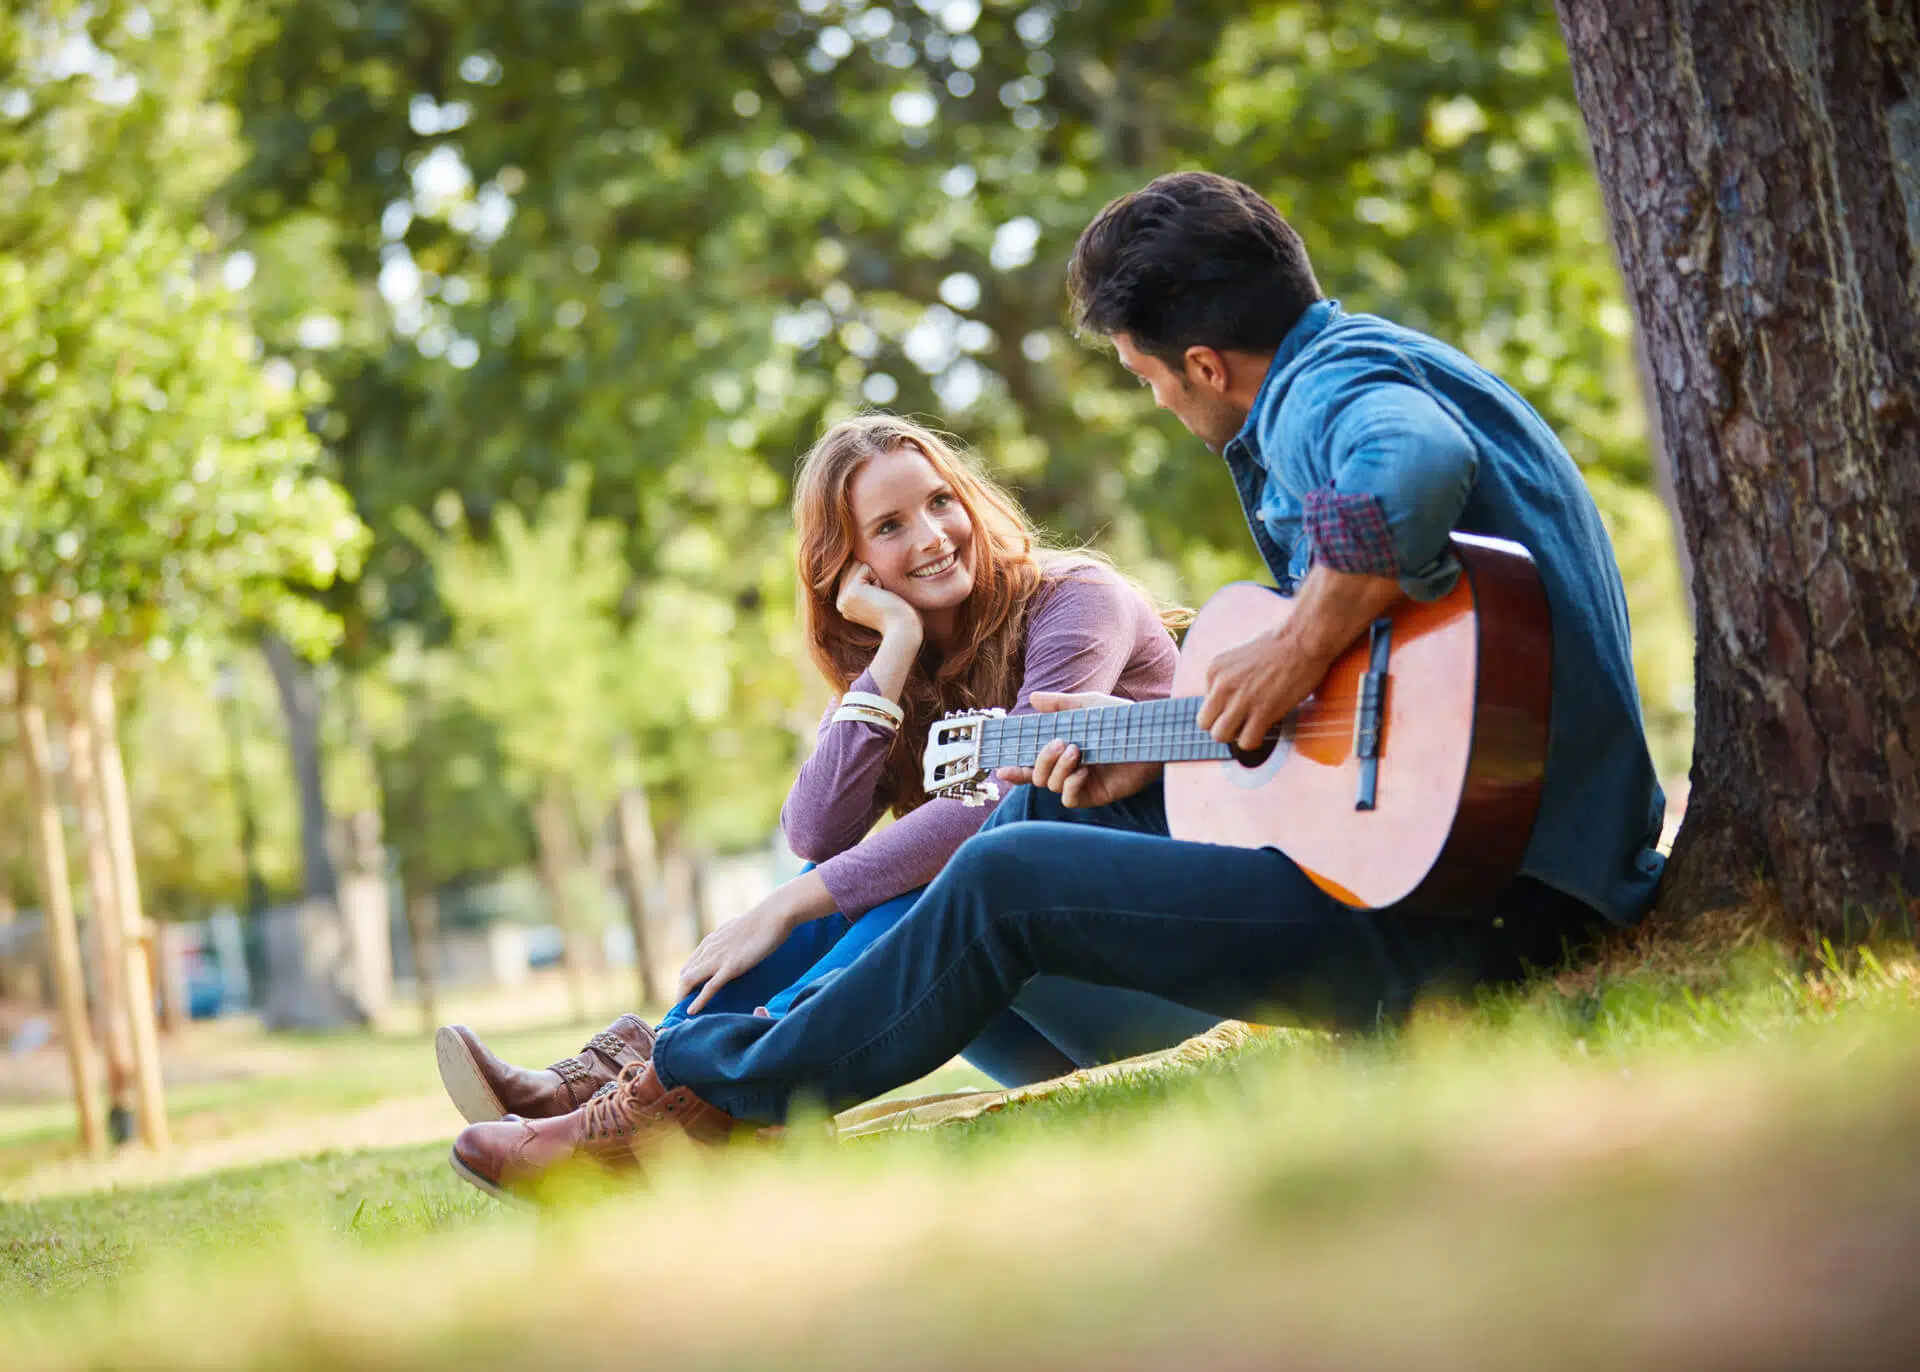 guy singing love song to a girl at the park